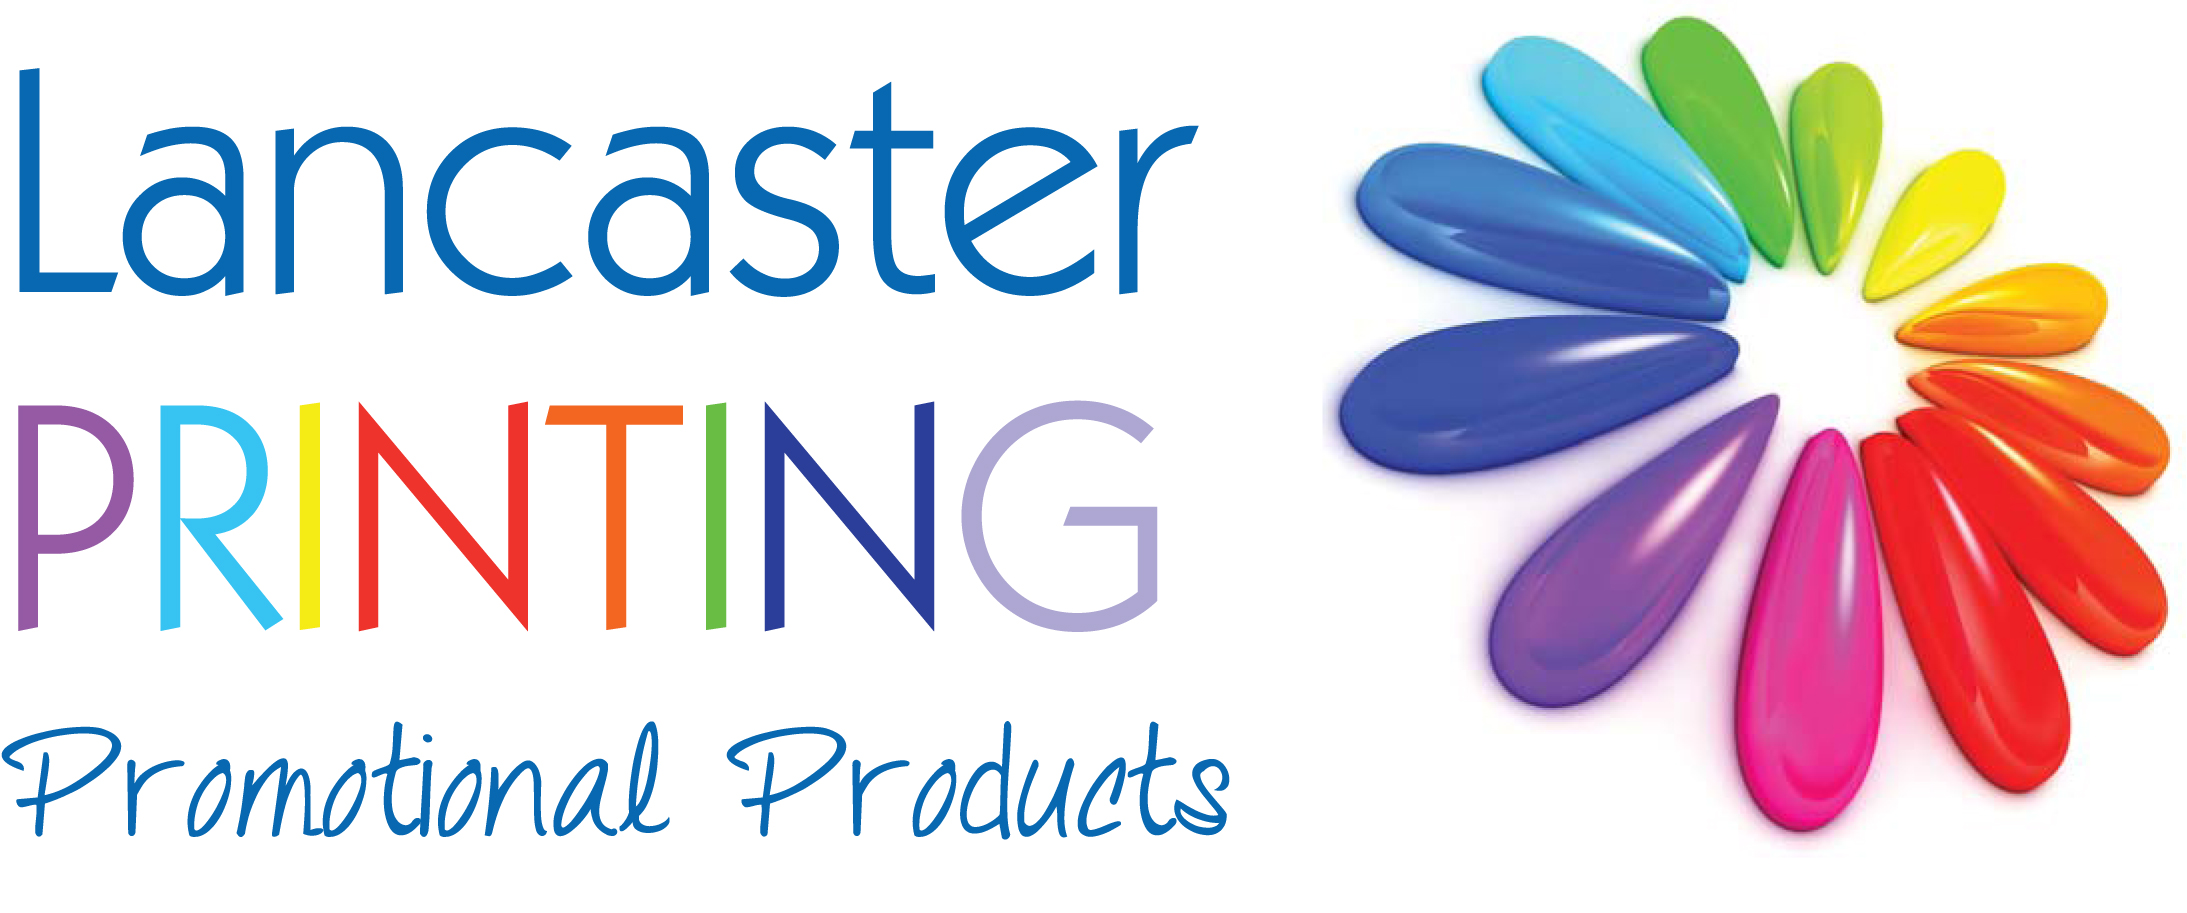 Lancaster Printing Limited